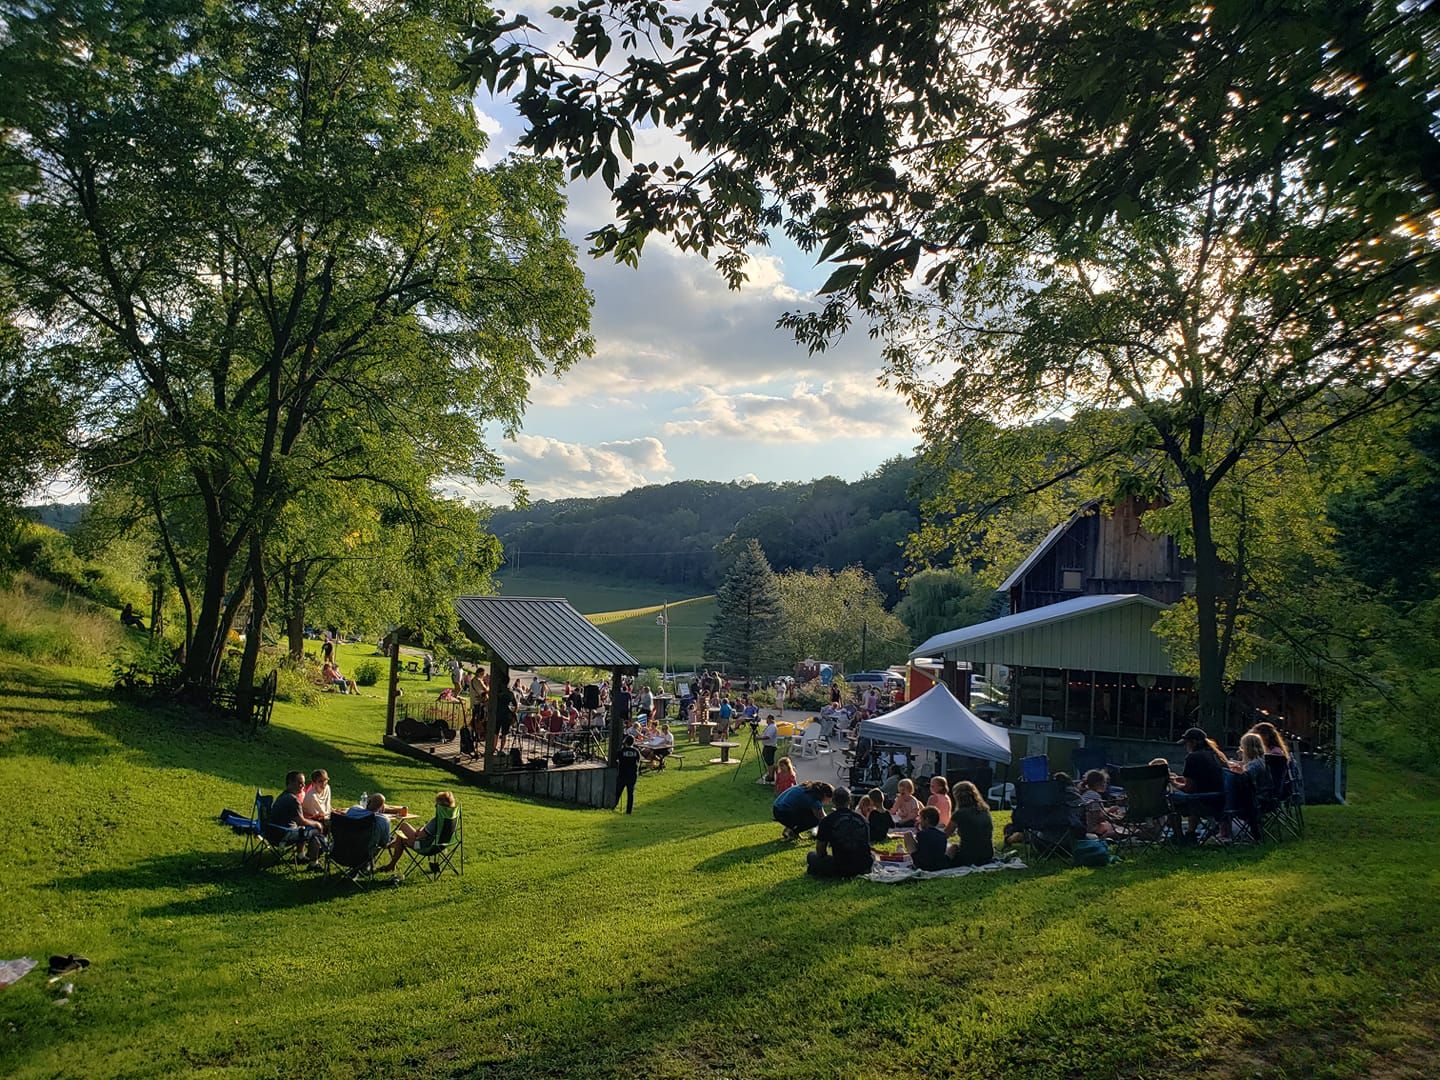 people gather at the pizza farm on the lawn